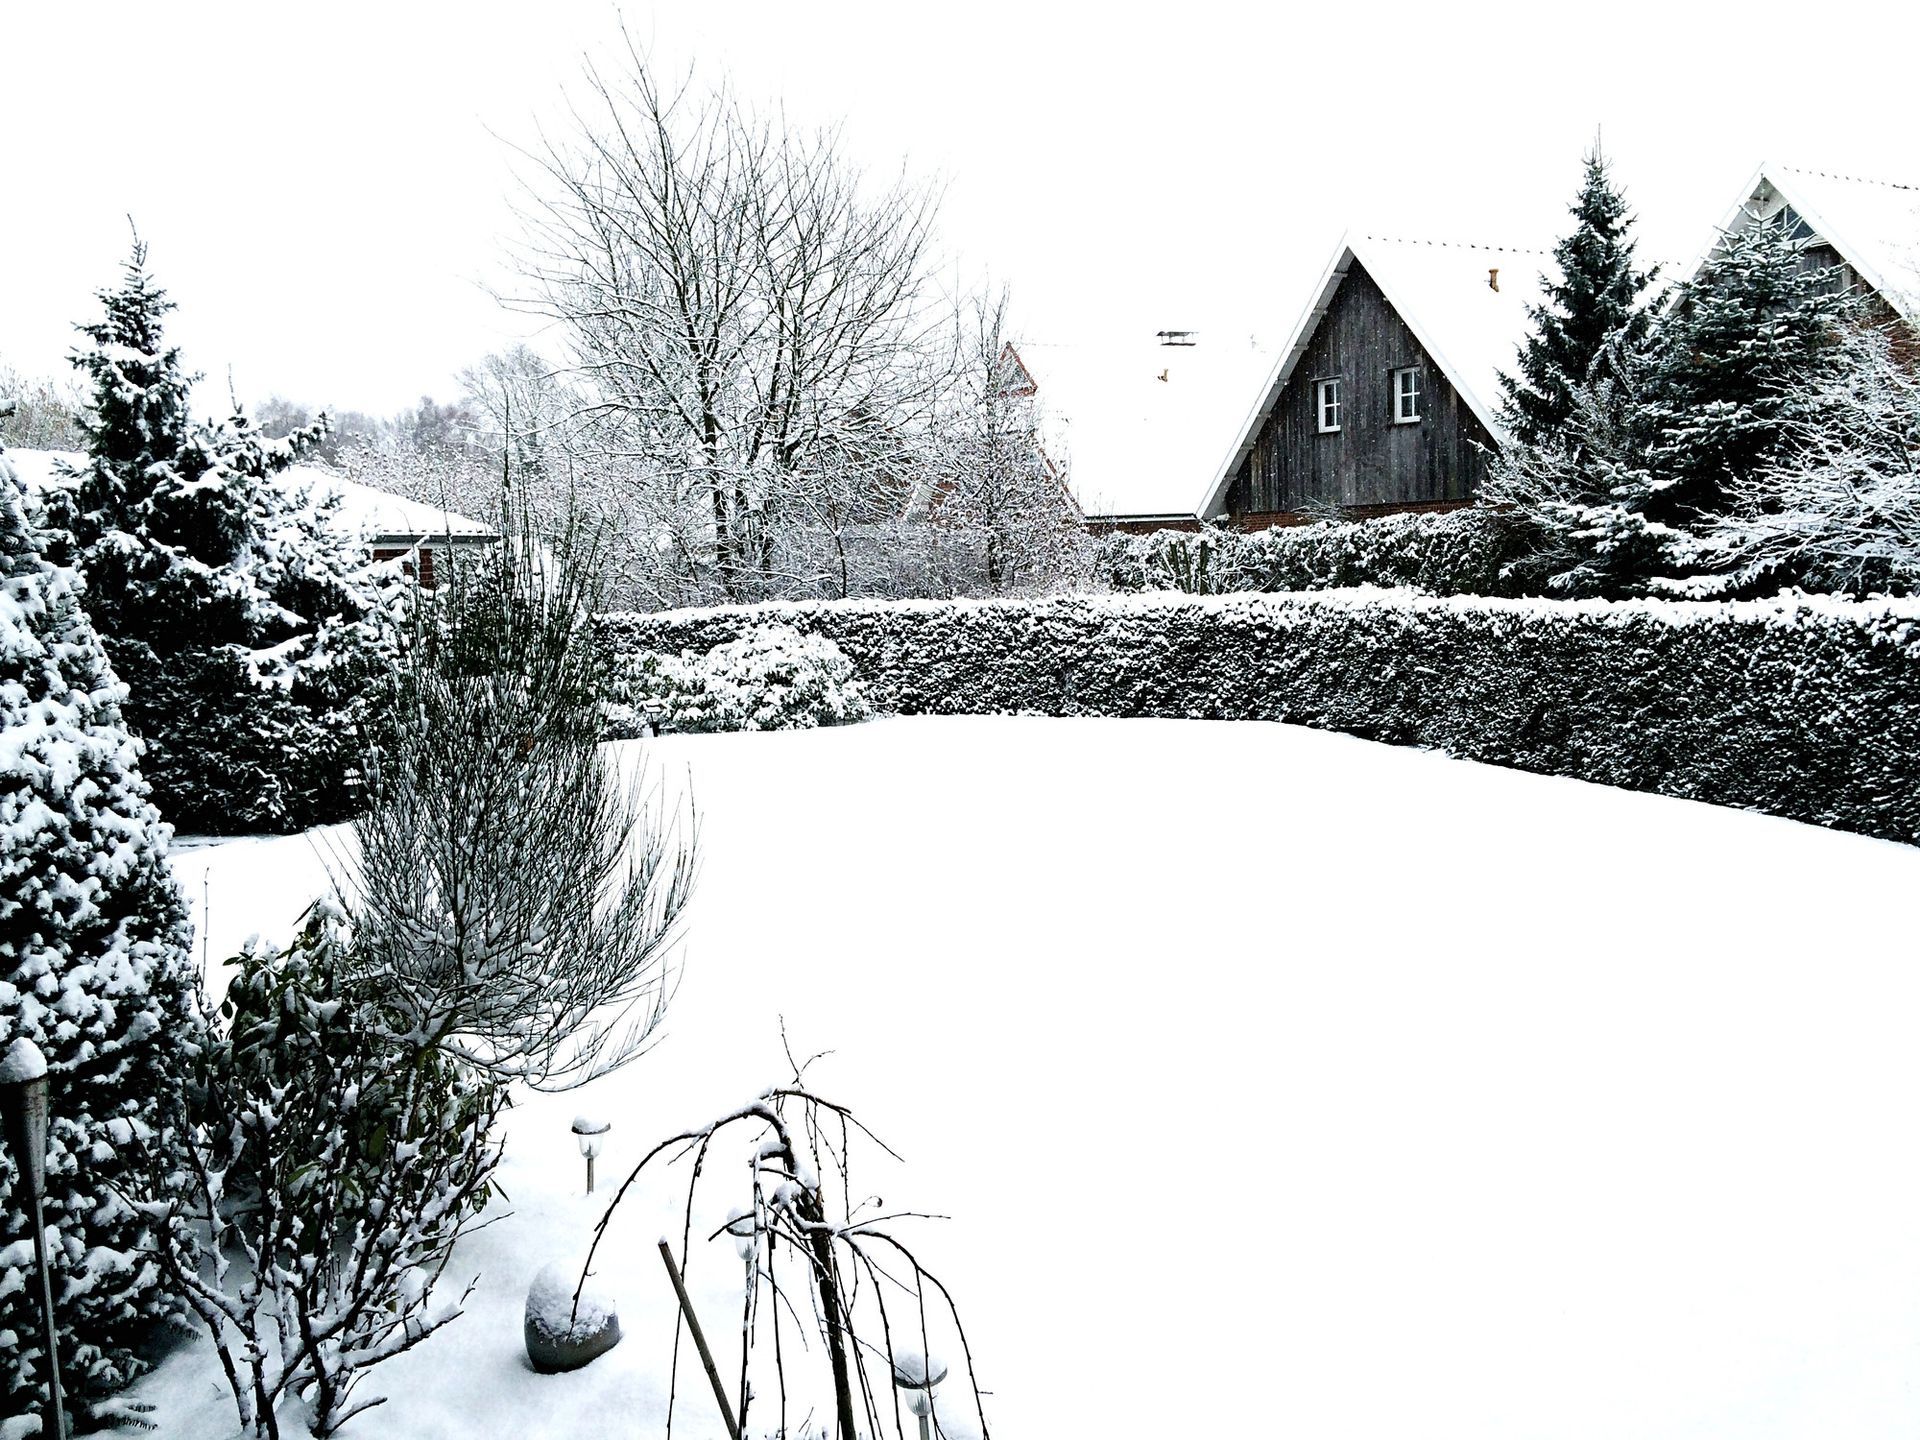 a black and white photo of a snowy garden with a house in the background .